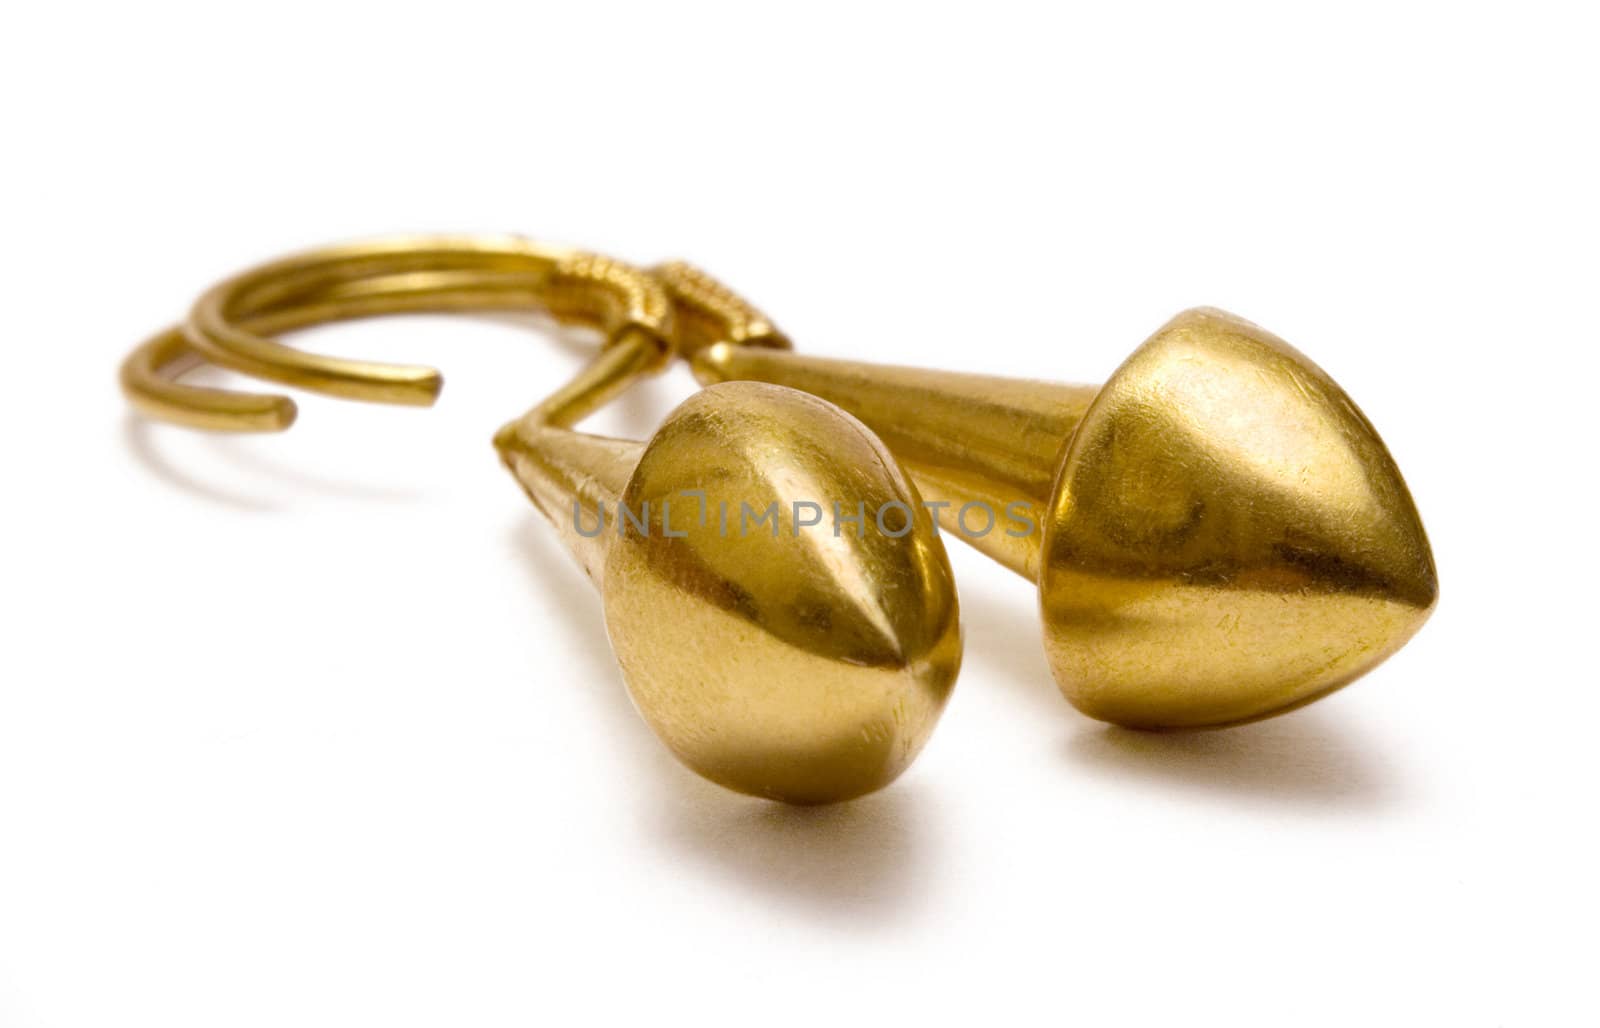 Pair of golden earrings isolated on a white background.